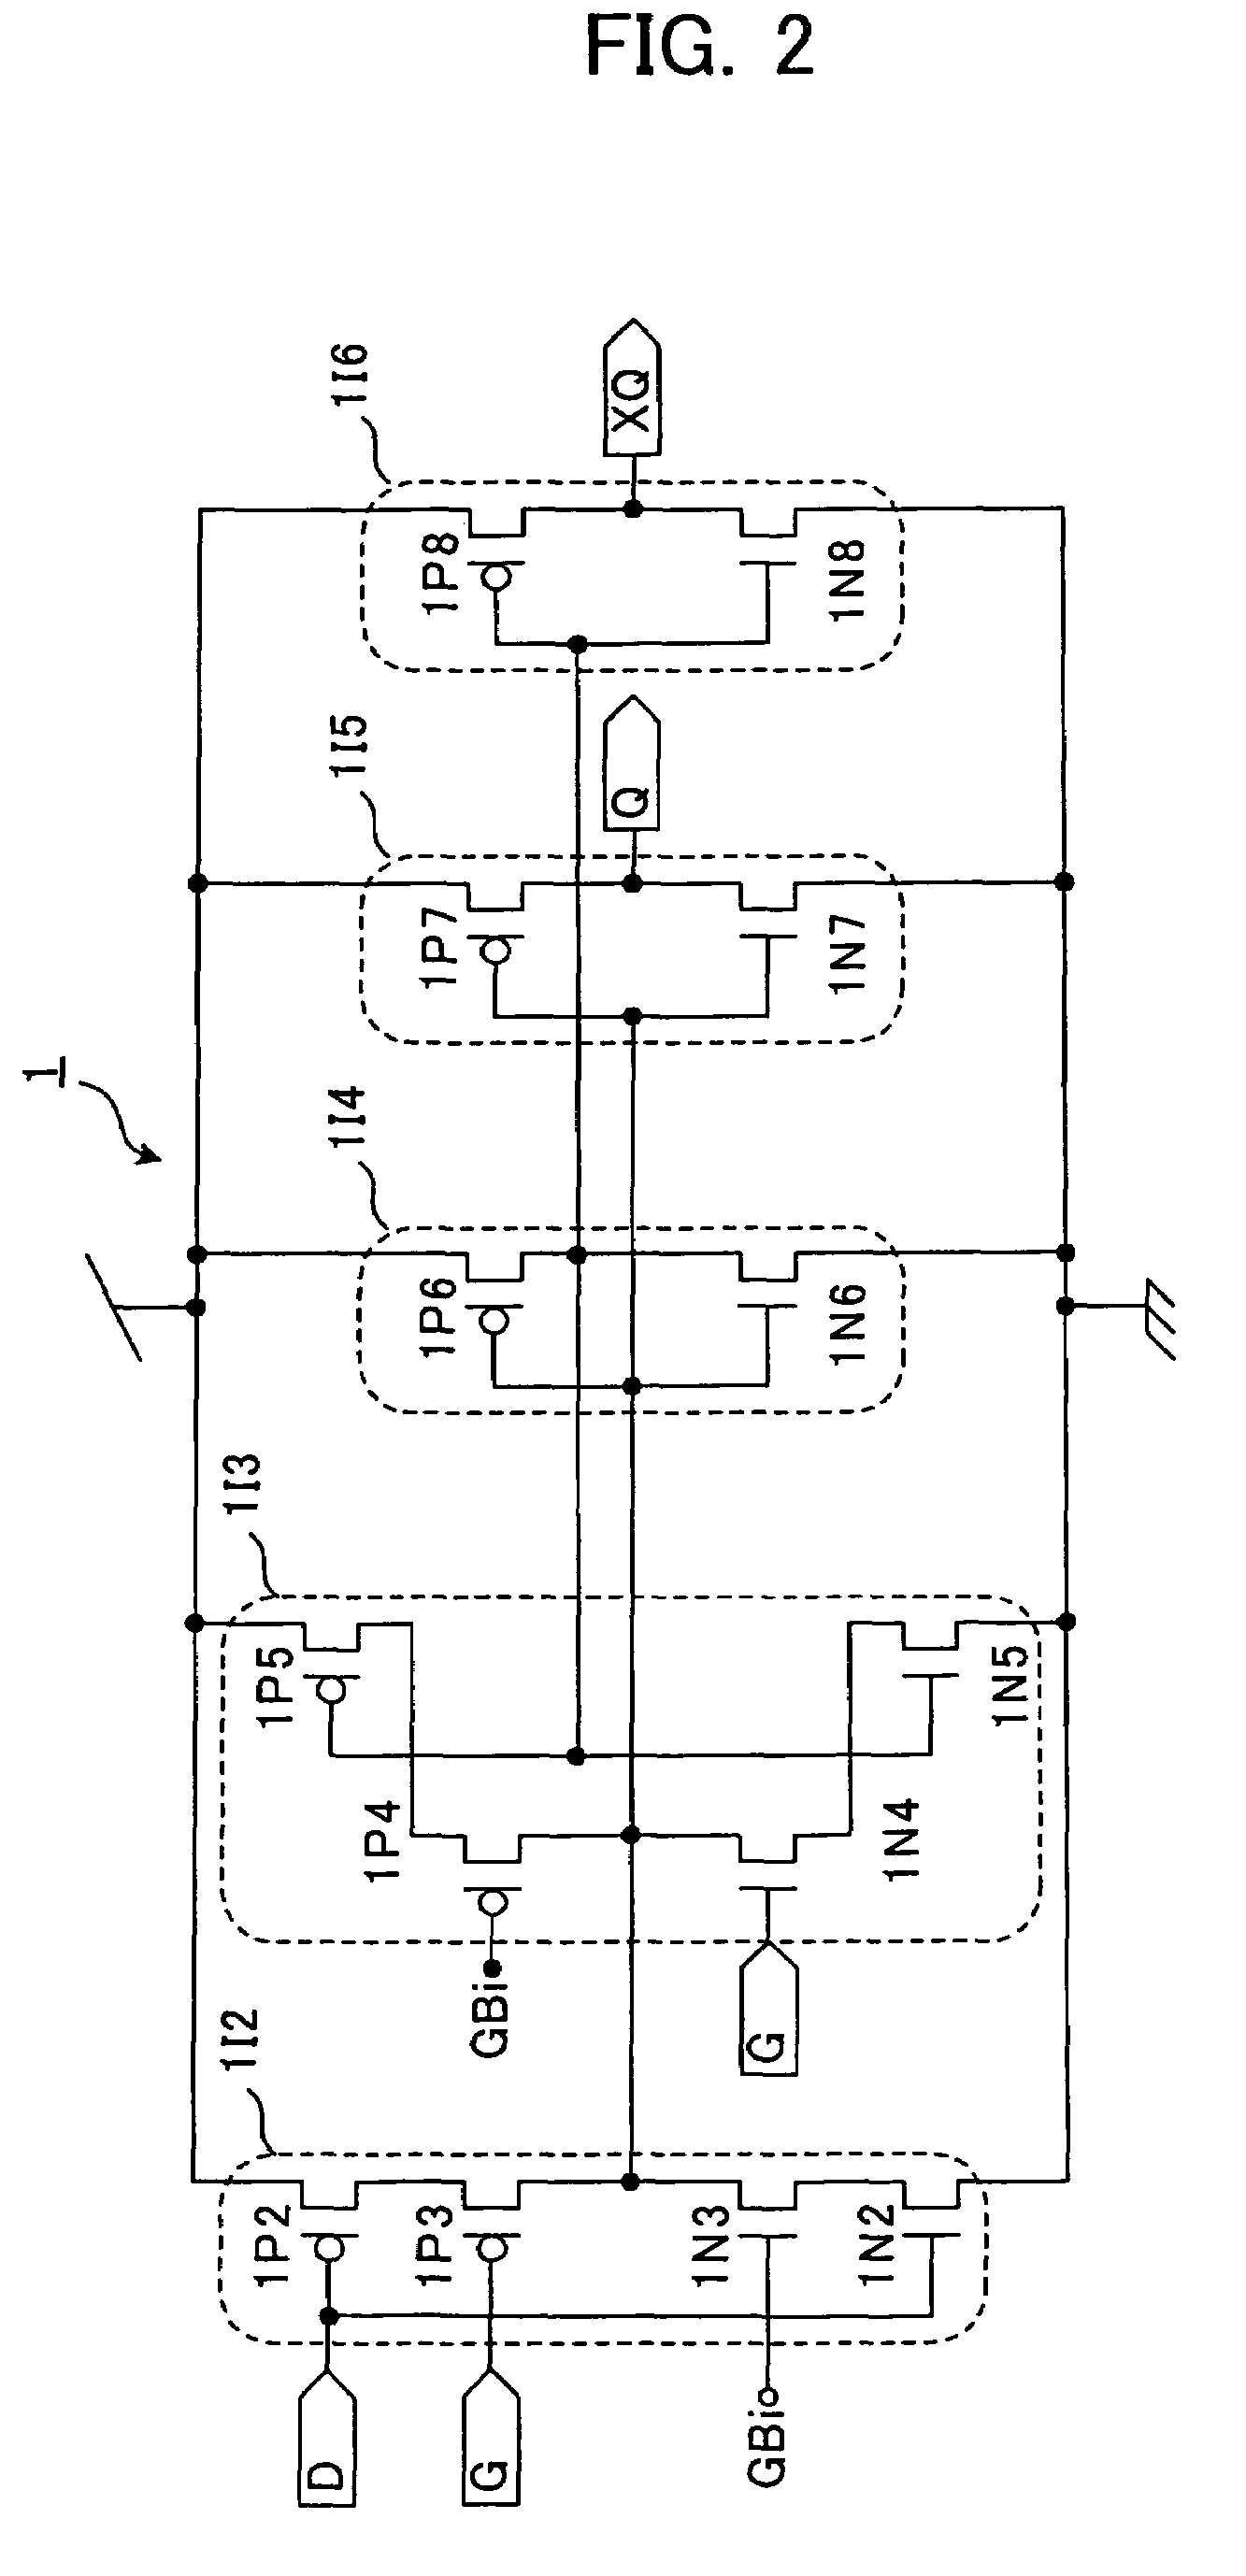 Single-event-effect tolerant SOI-based inverter, NAND element, NOR element, semiconductor memory device and data latch circuit